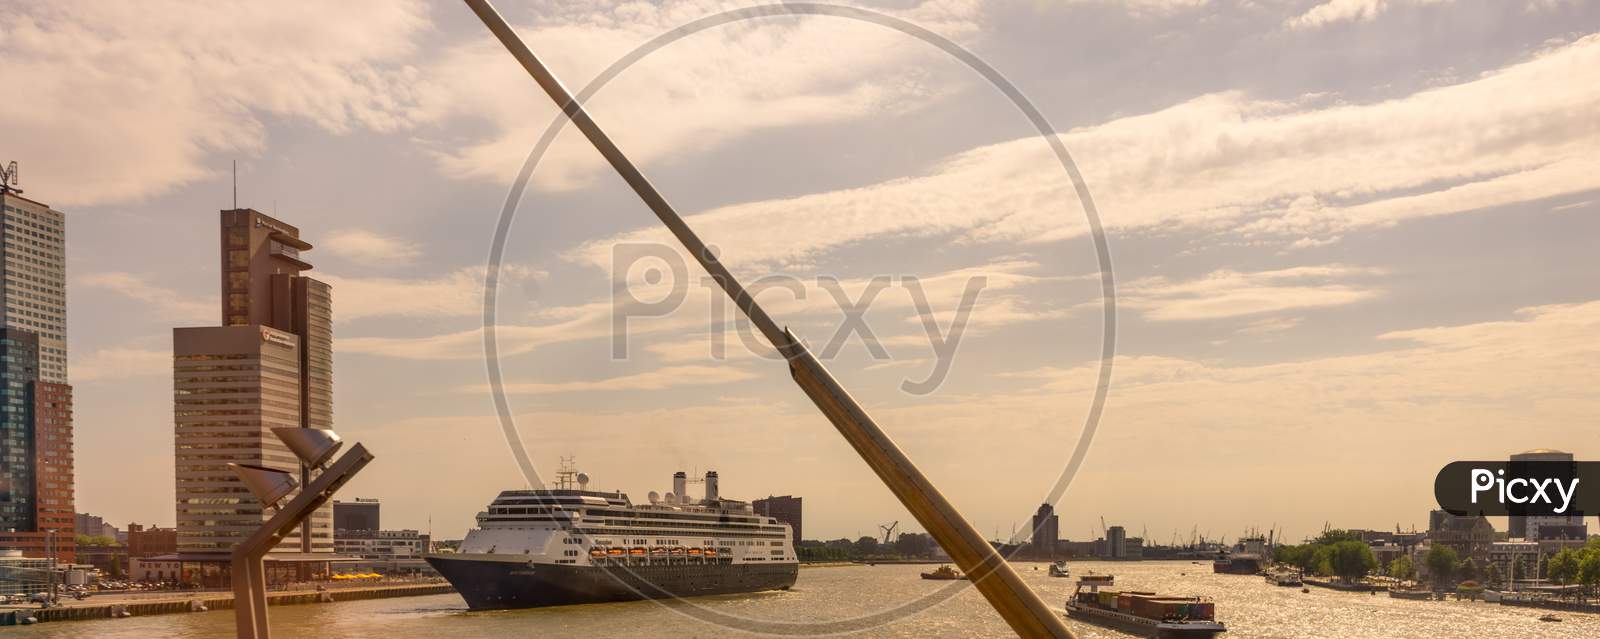 Rotterdam, Netherlands - 27 May: Erasmus Bridge At Rotterdam With Cruise Ship In Background On 27 May 2017. Rotterdam Is A Major Port City In The Dutch Province Of South Holland